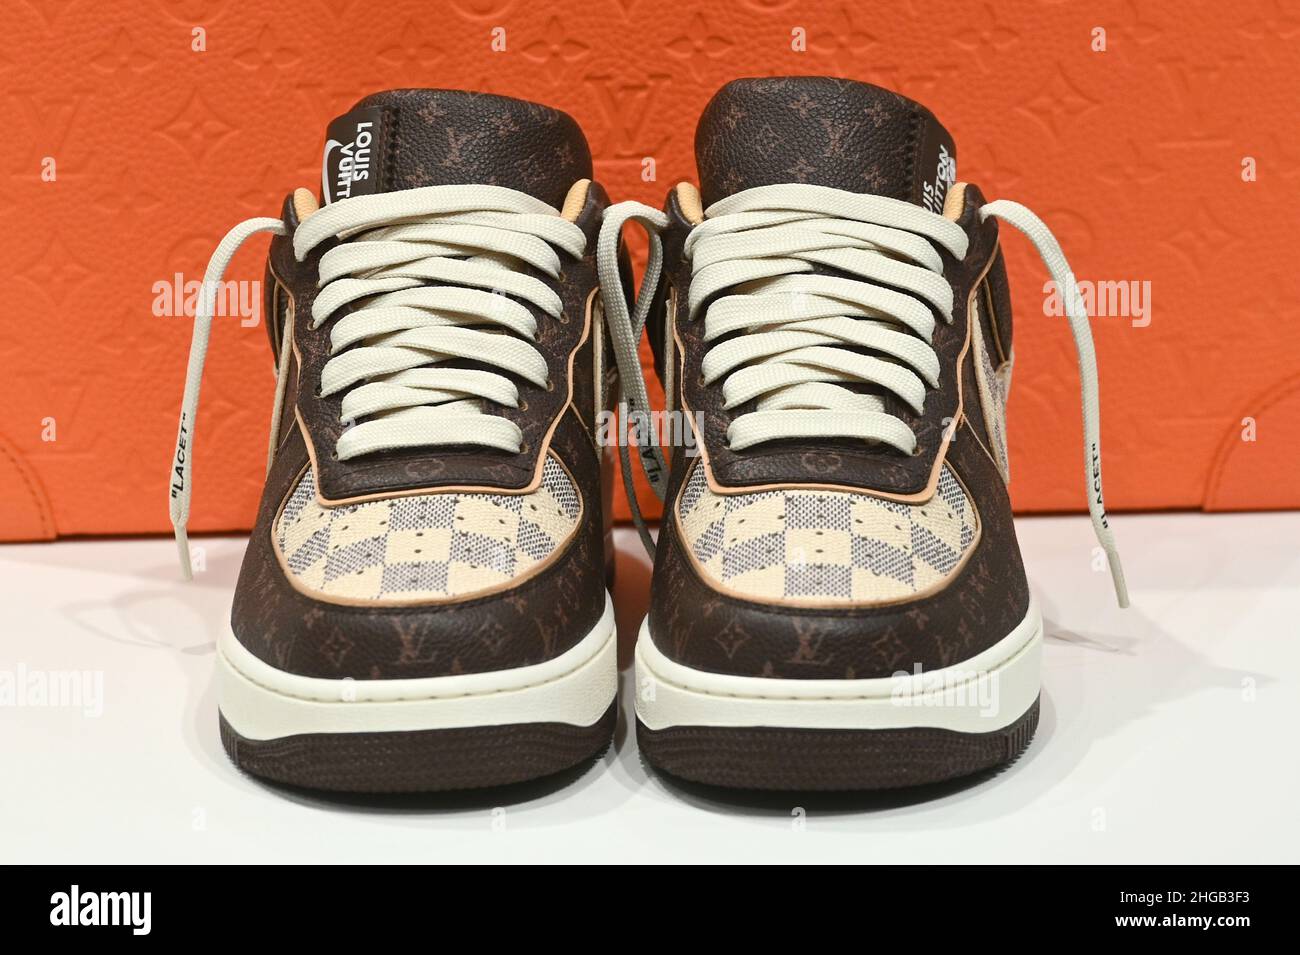 Louis Vuitton Air Force 1s Release Date: Shoes Sold at Sotheby's